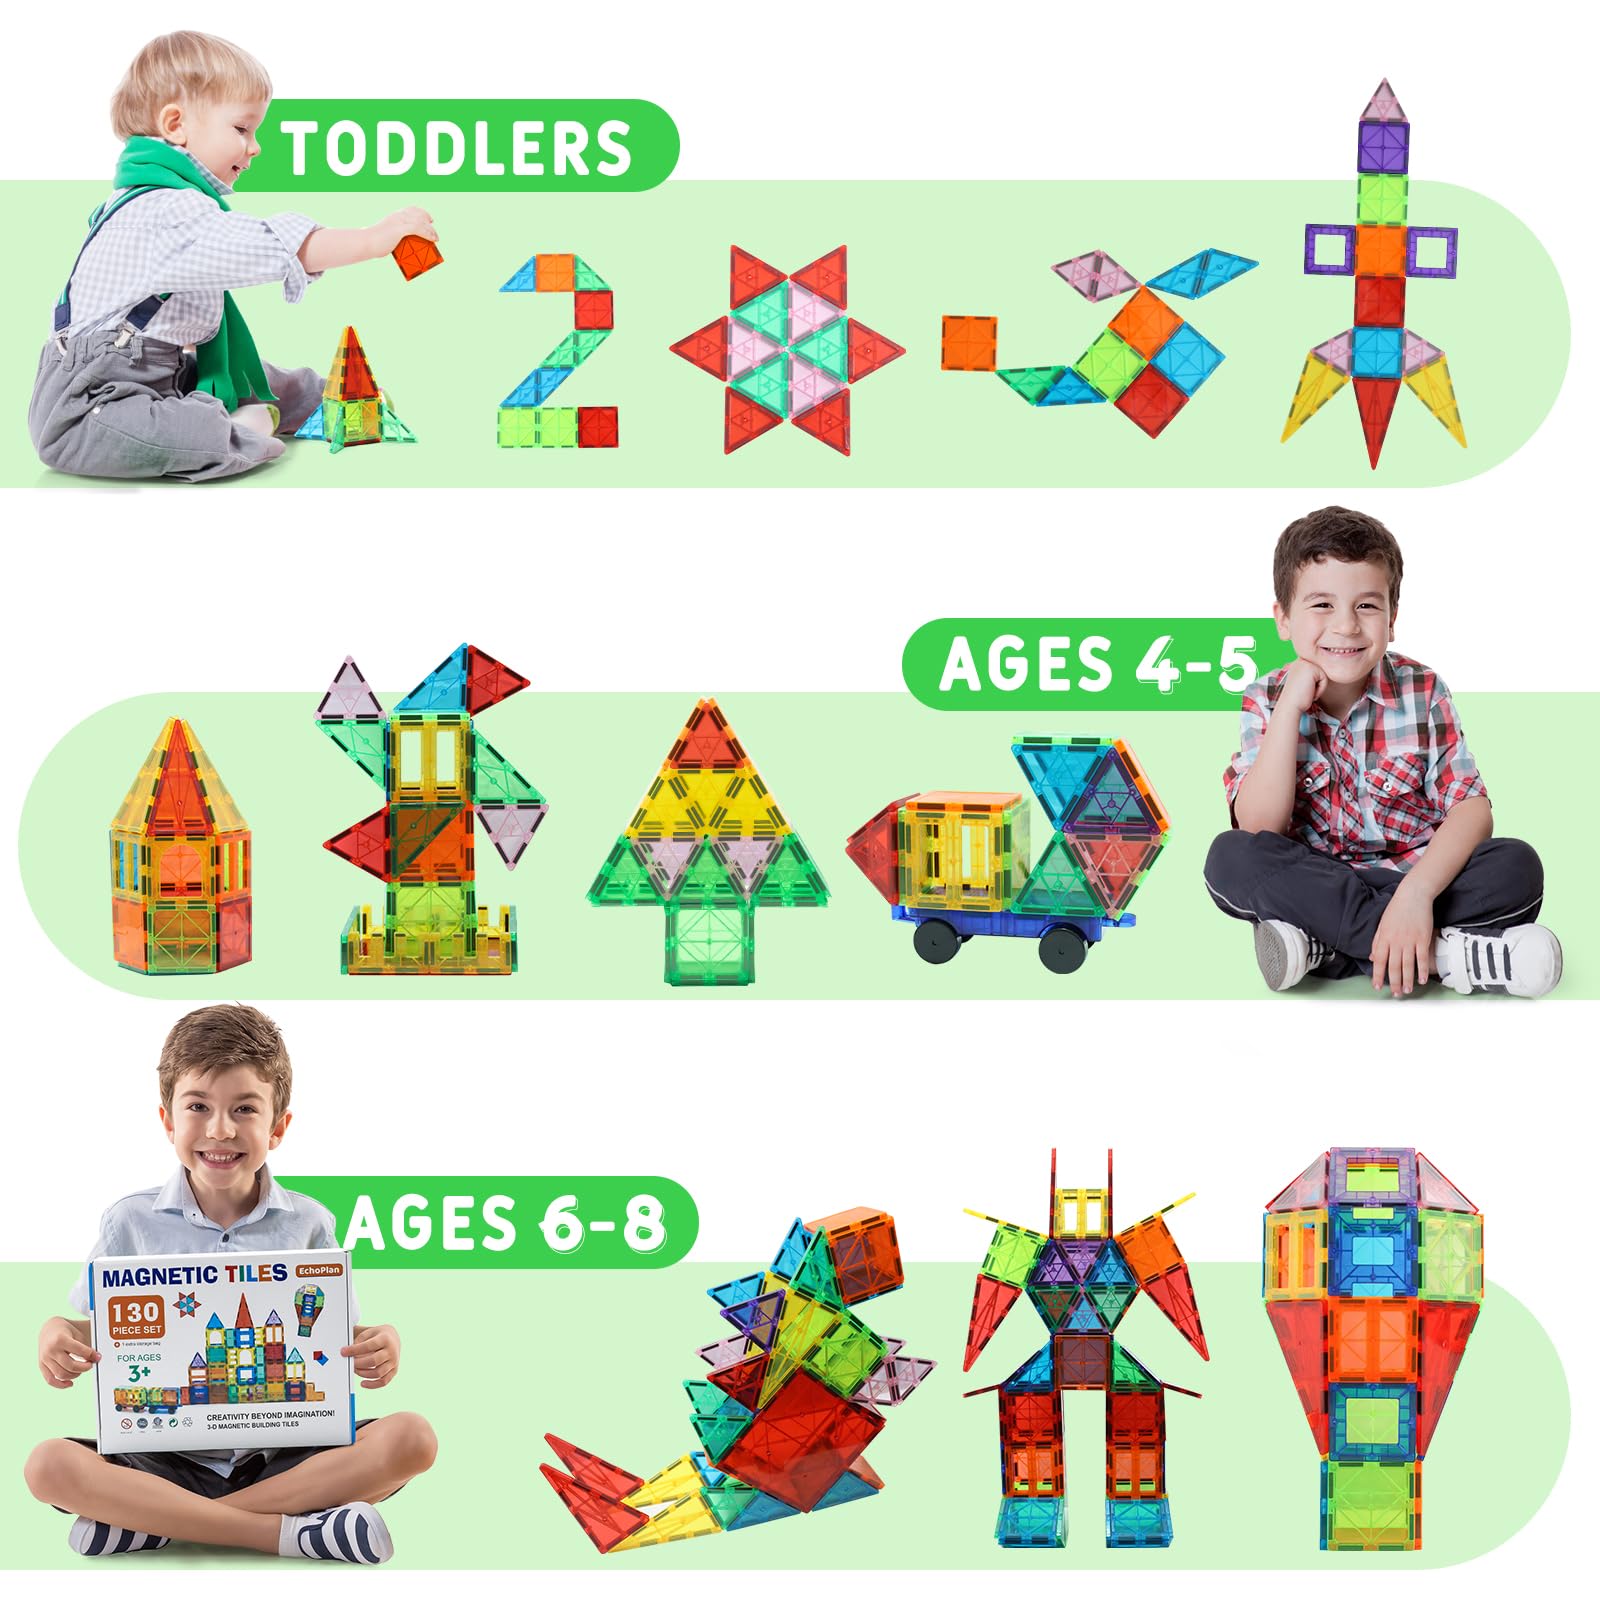 EchoPlan Magnetic Tiles, 130PCS Magnetic Blocks with 2 Cars, Magnet Tiles 3D Clear Building Blocks Set, STEM Sensory Educational Toys Gift for Toddlers Kids Boys 3 4 5 6 7 8 9+ Year Old